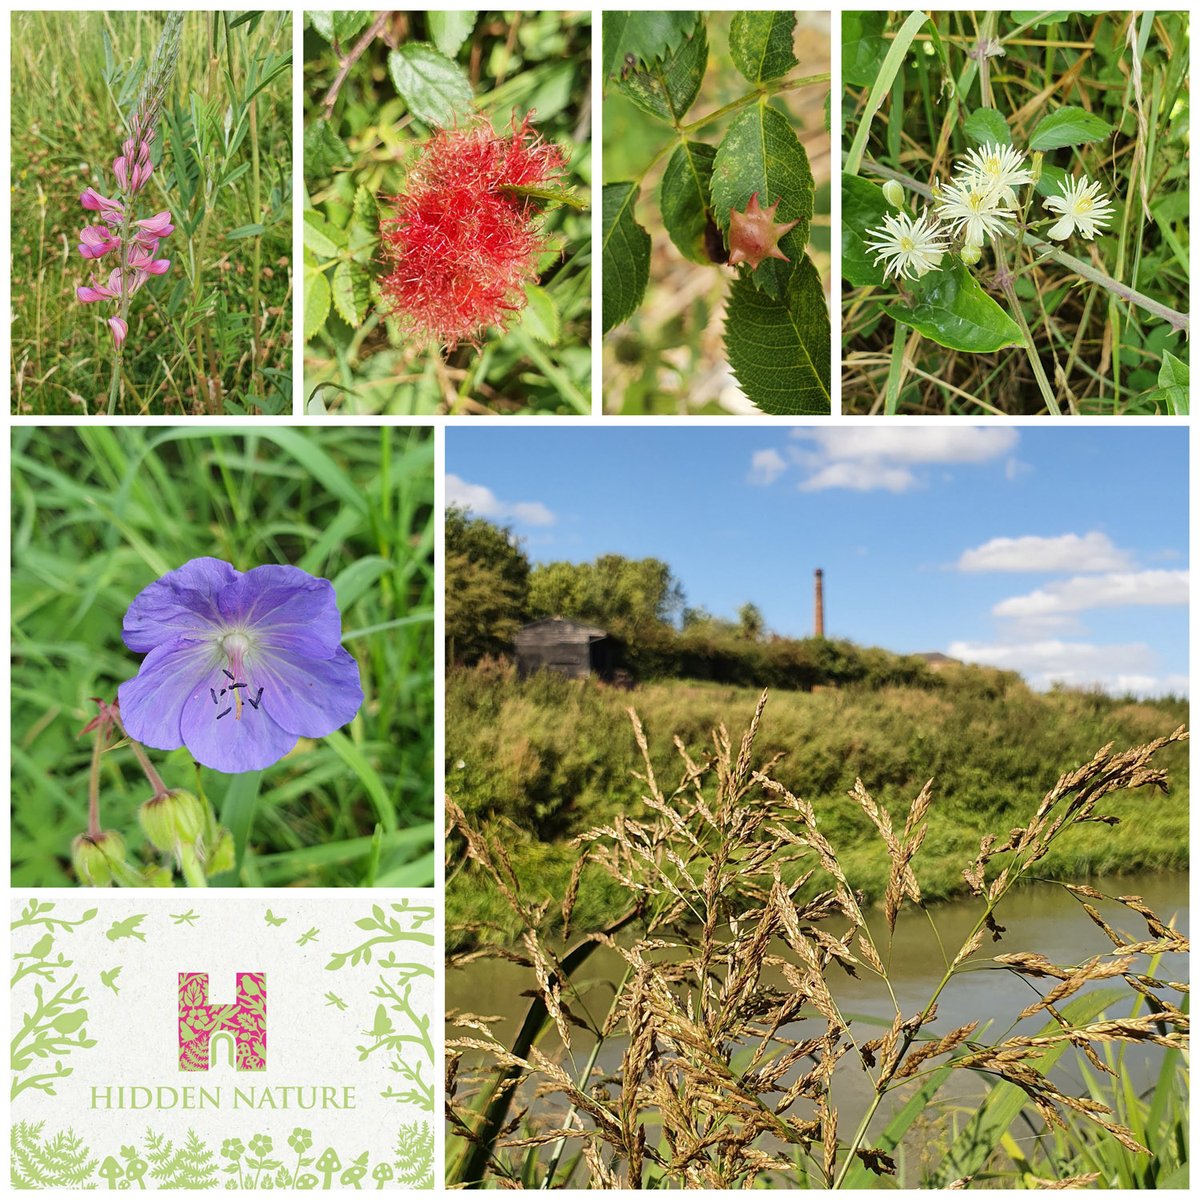 Weather or not to walk? We've been out & about this summer and look forward to seeing what Autumn brings to the Pewsey Vale. Please note : at present there is no access to our site from the canal. See visitor information croftonbeamengines.org
#HODs #HiddenNature #WildFlowerHour